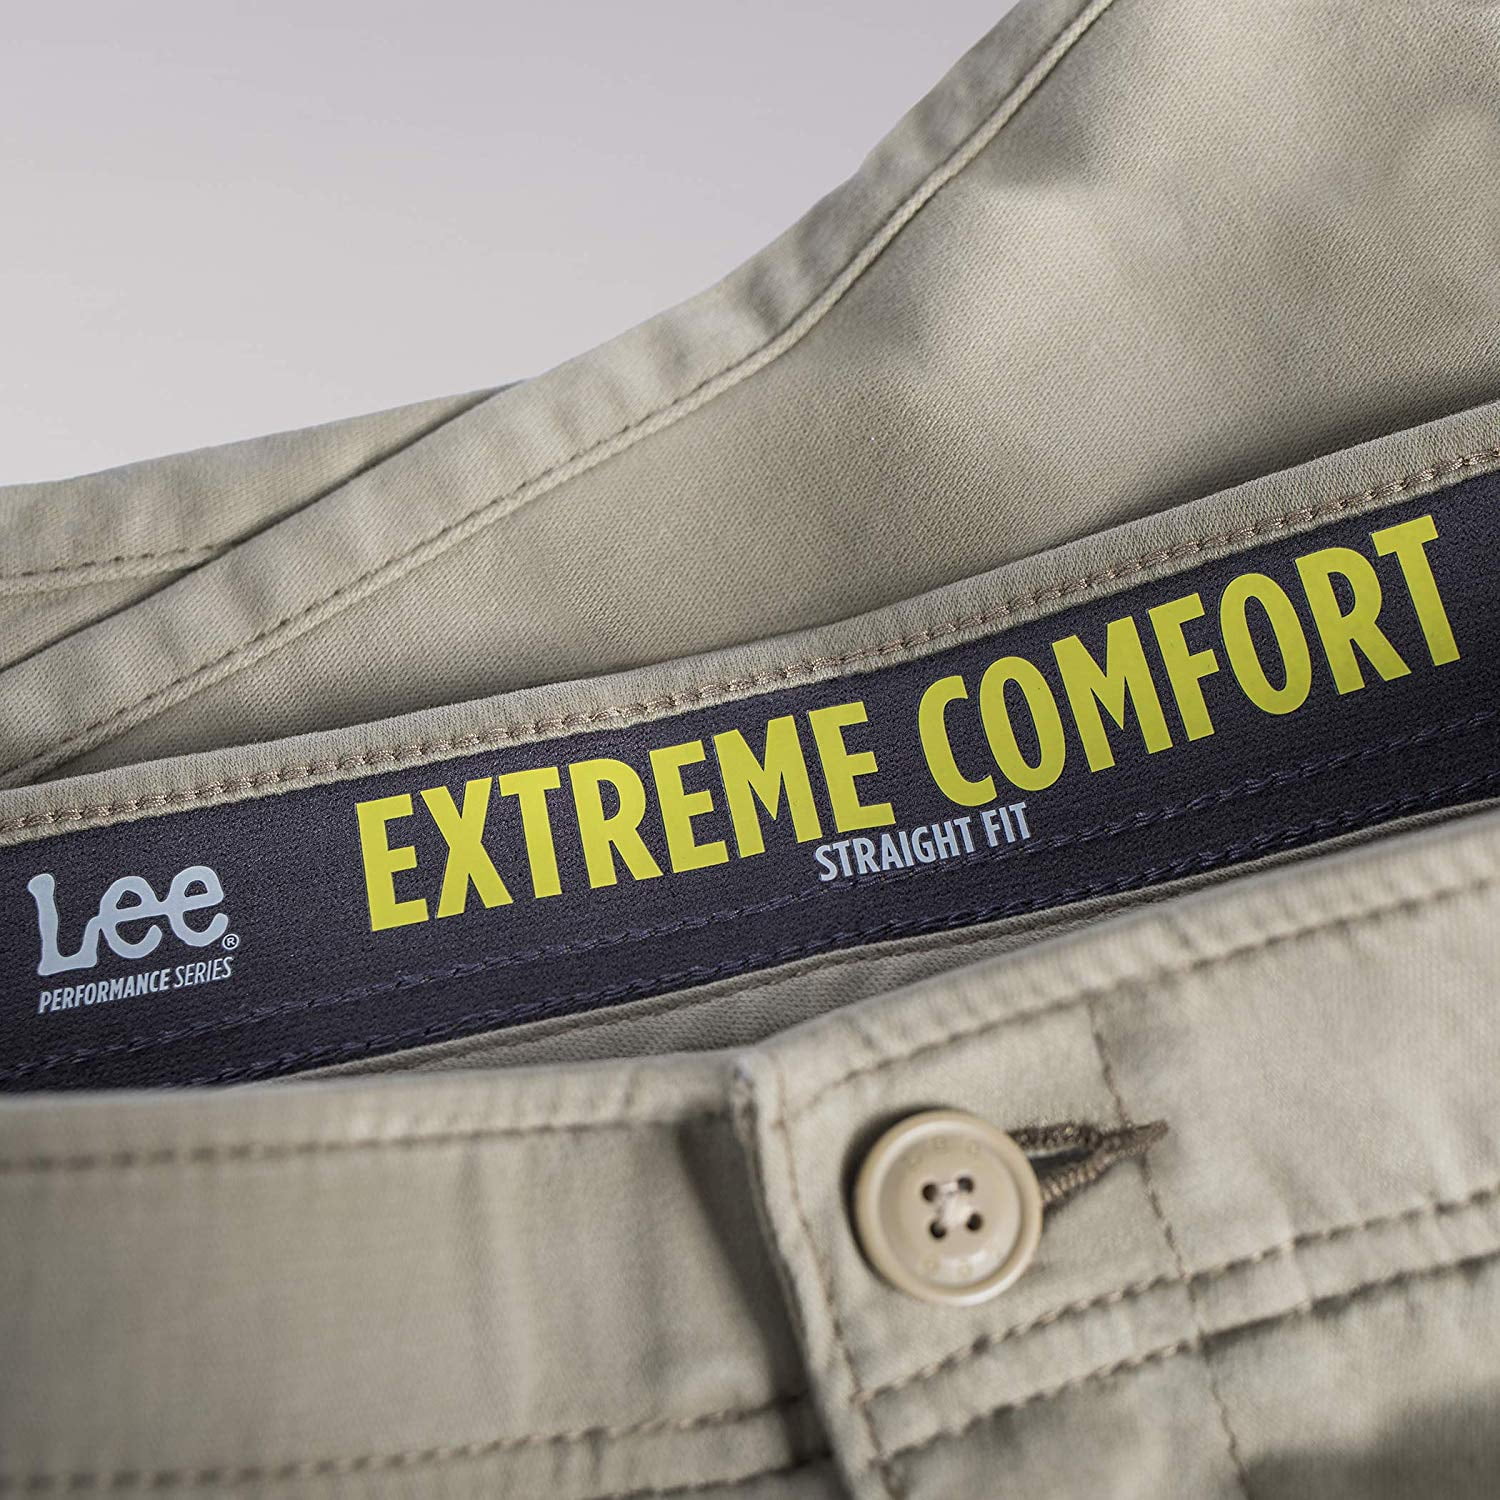 lee extreme comfort jeans